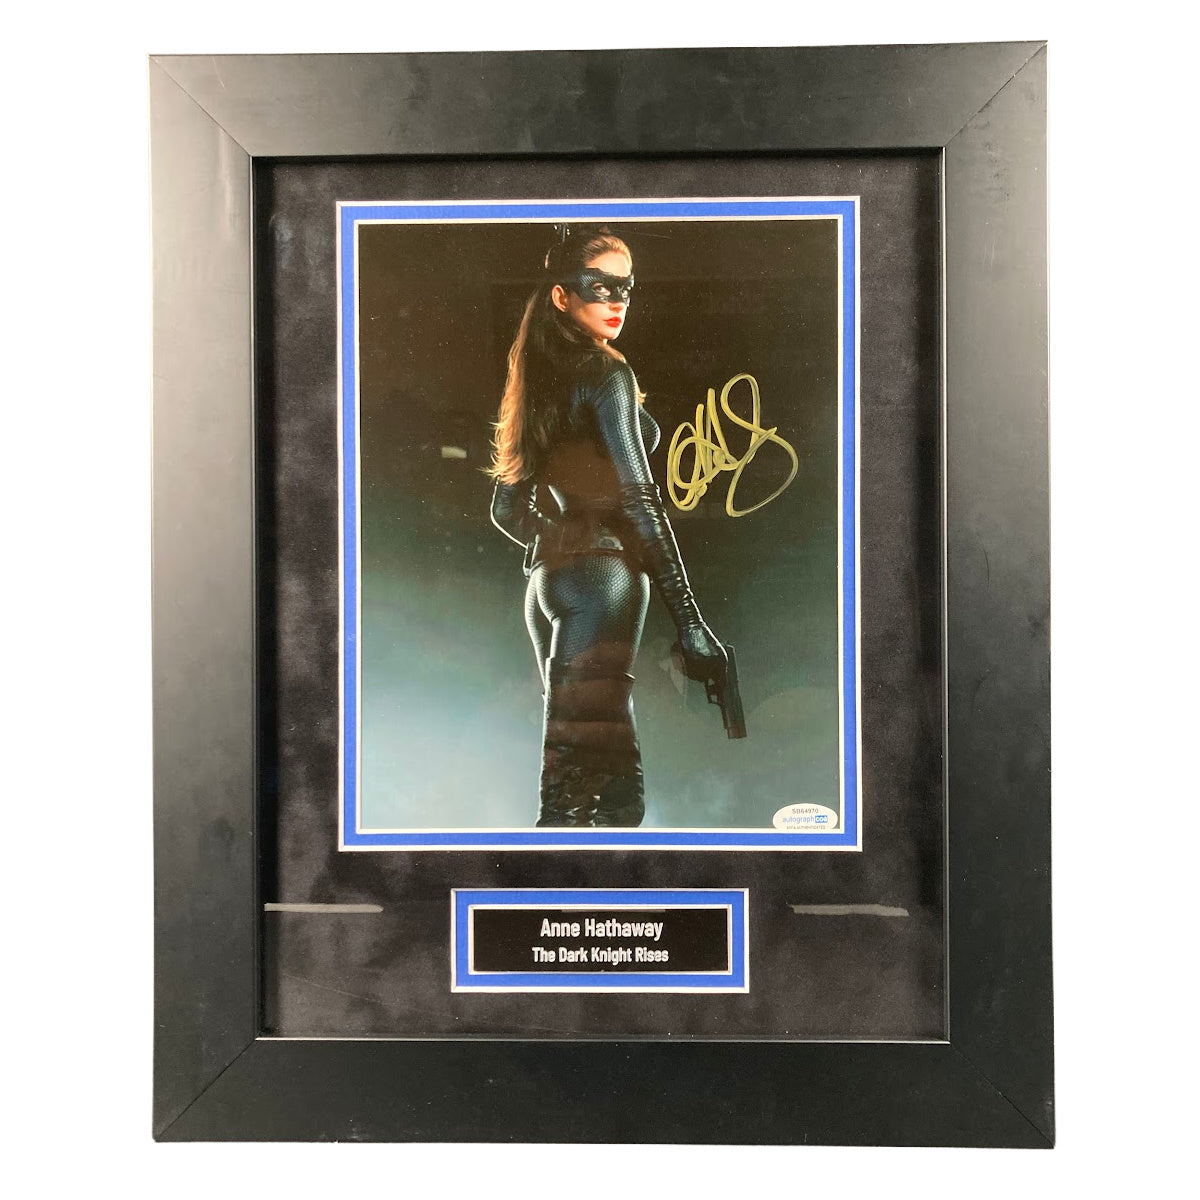 Anne Hathaway Signed 8x10 Photo The Dark Knight Rises Framed Autographed ACOA